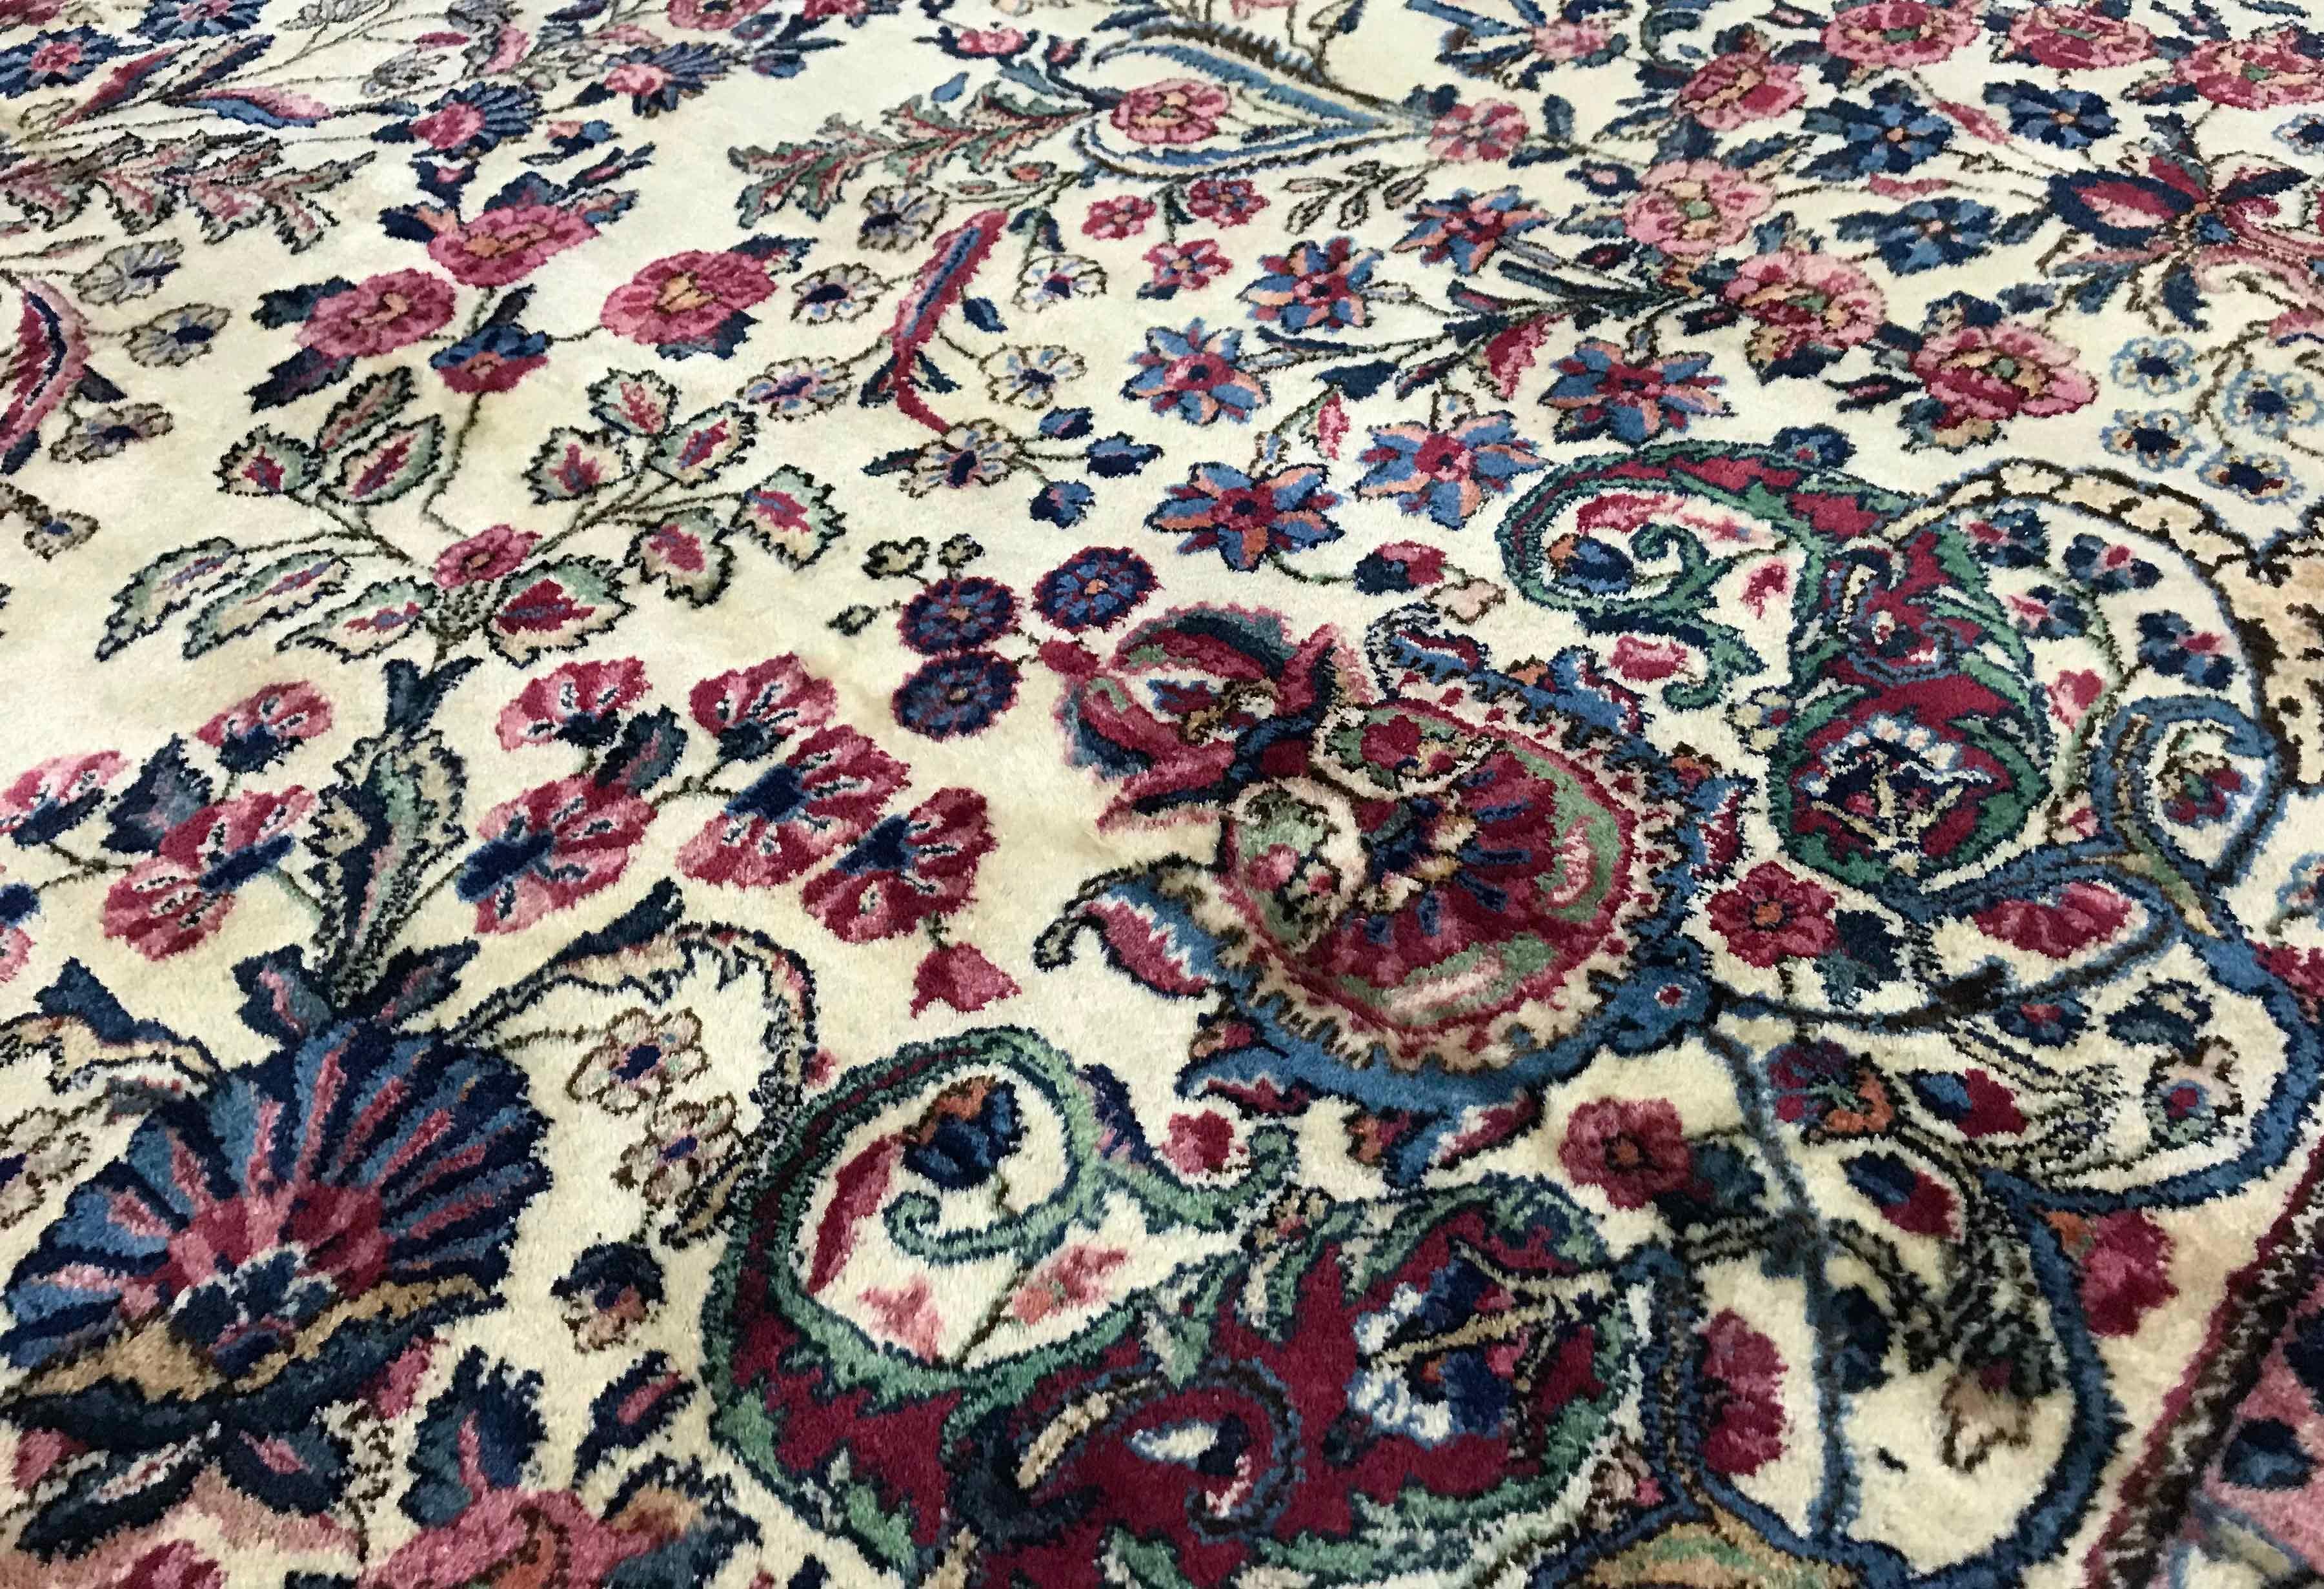 Vintage Persian Kerman Ivory / Blue, circa 1940. A Classic look to this oversize Kerman rug with a soft ivory field filled with floral designs and incorporating a central design repeating the floral theme, surrounded by a main border and multiple